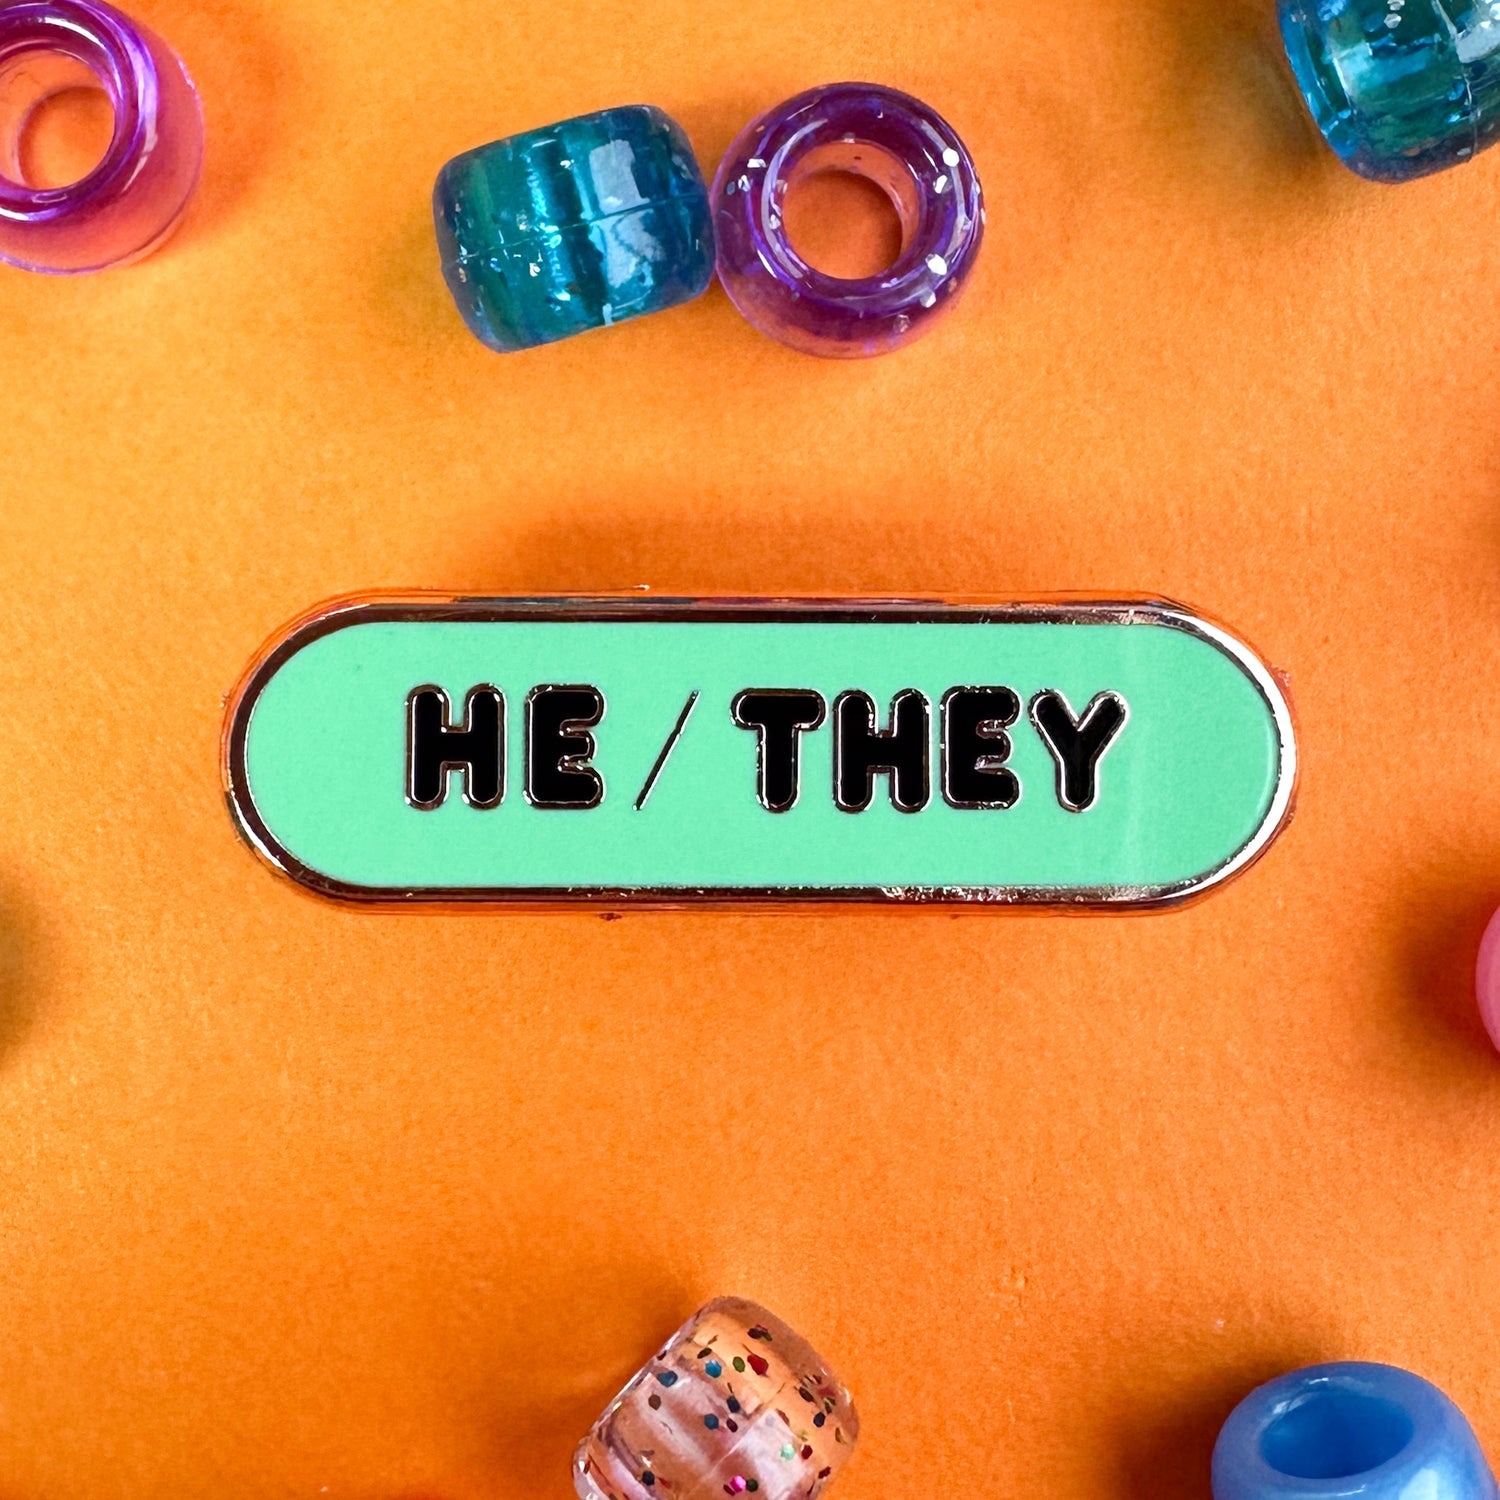 A mint oval shaped pin with black puffy letters that read "He/They" the pin is on an orange background with pony beads around. 